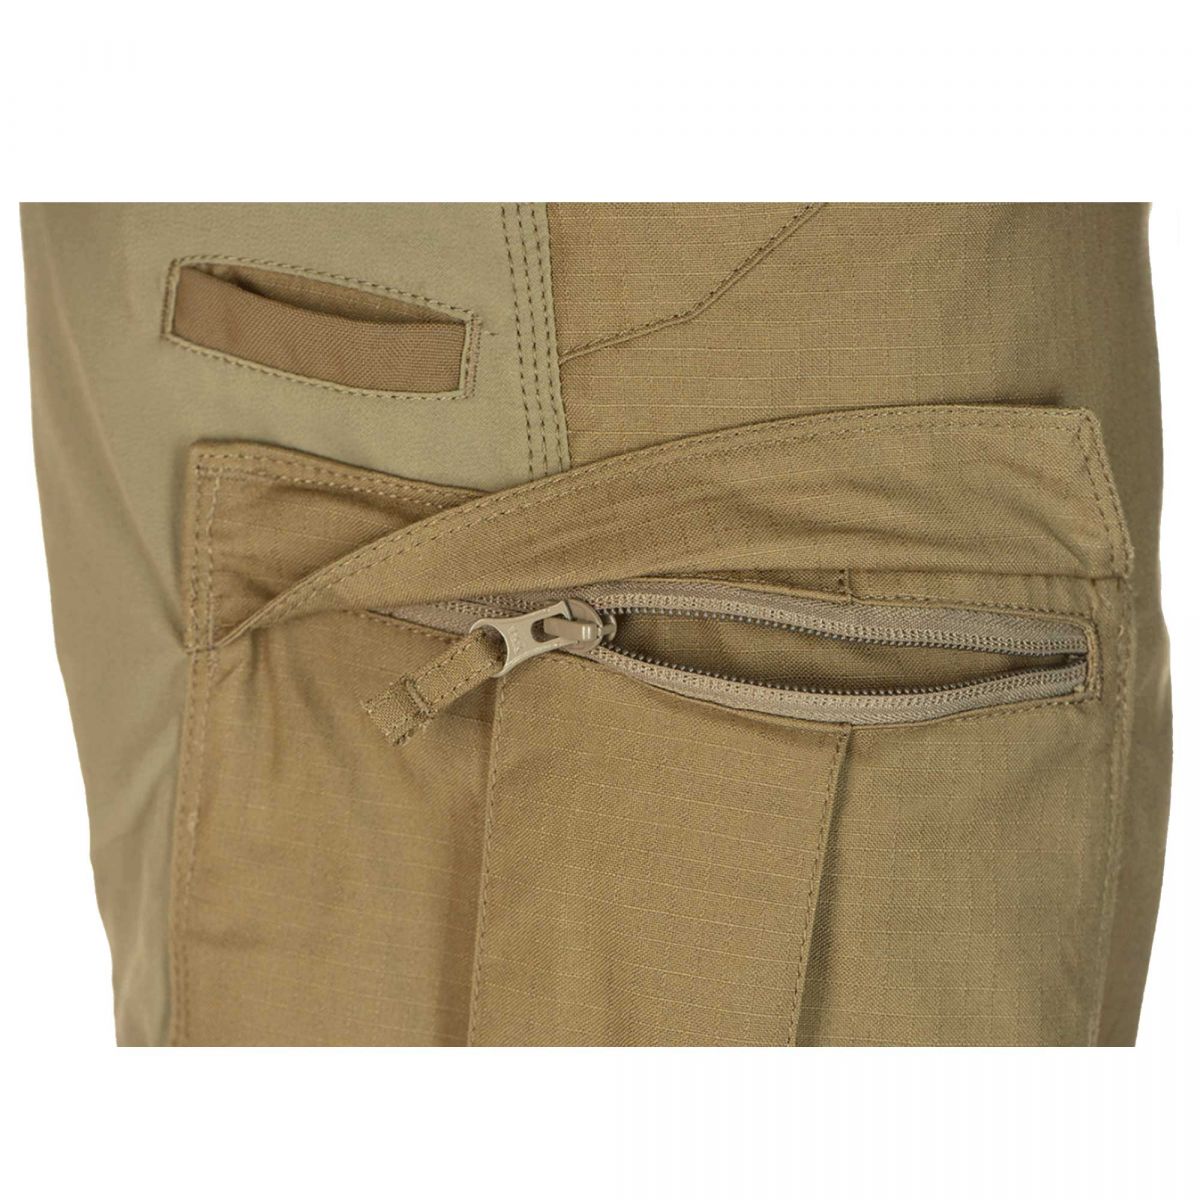 Purchase the Clawgear MK.II Operator Combat Pant coyote by ASMC